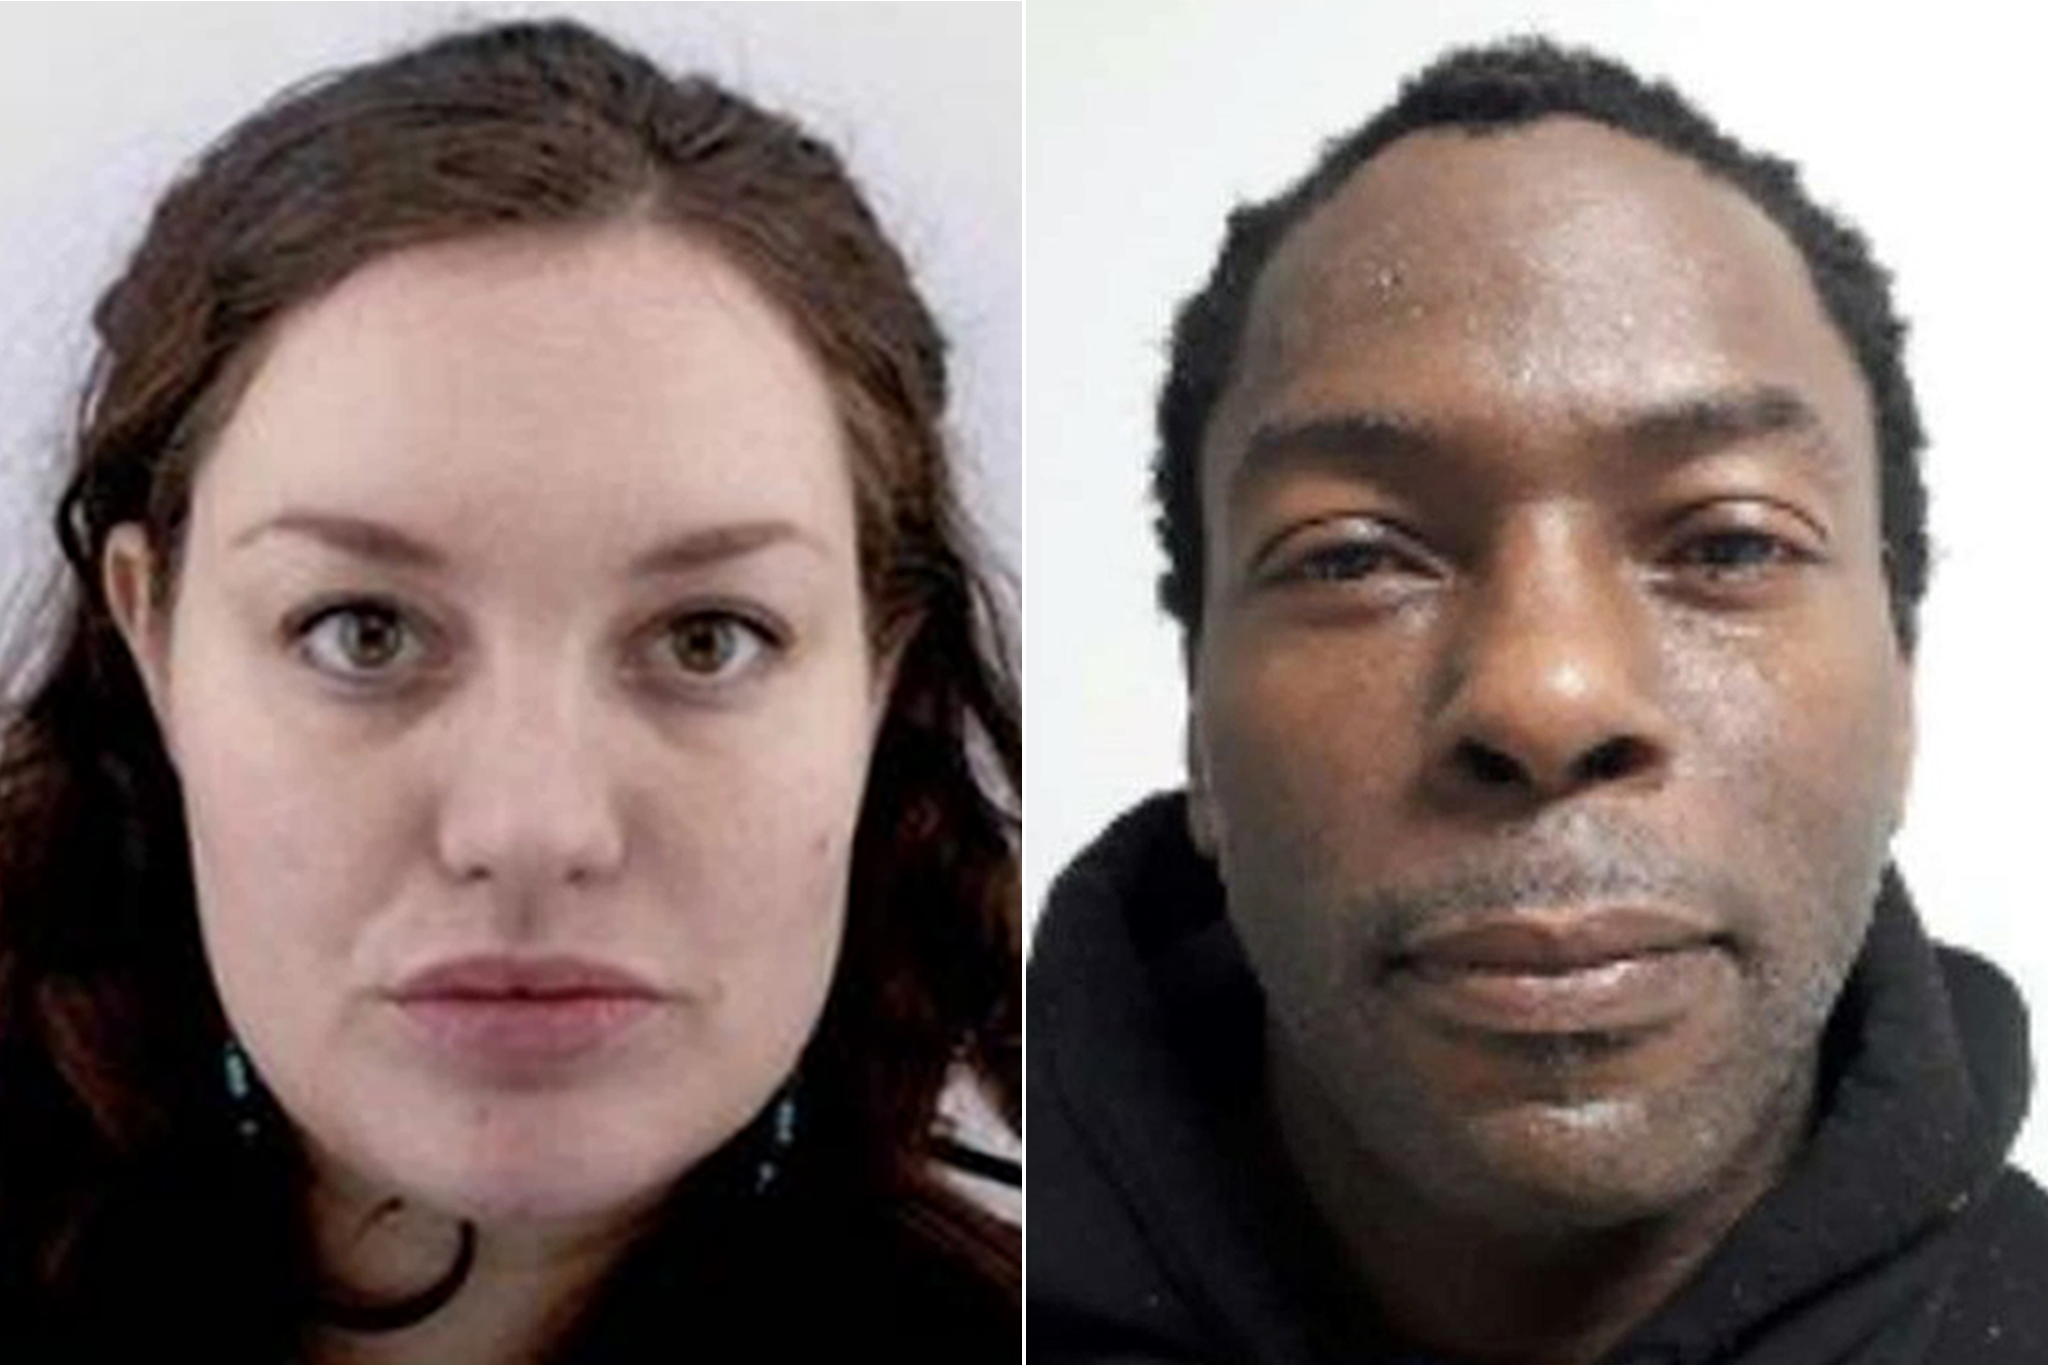 The couple are accused of manslaughter by gross negligence of their baby daughter Victoria